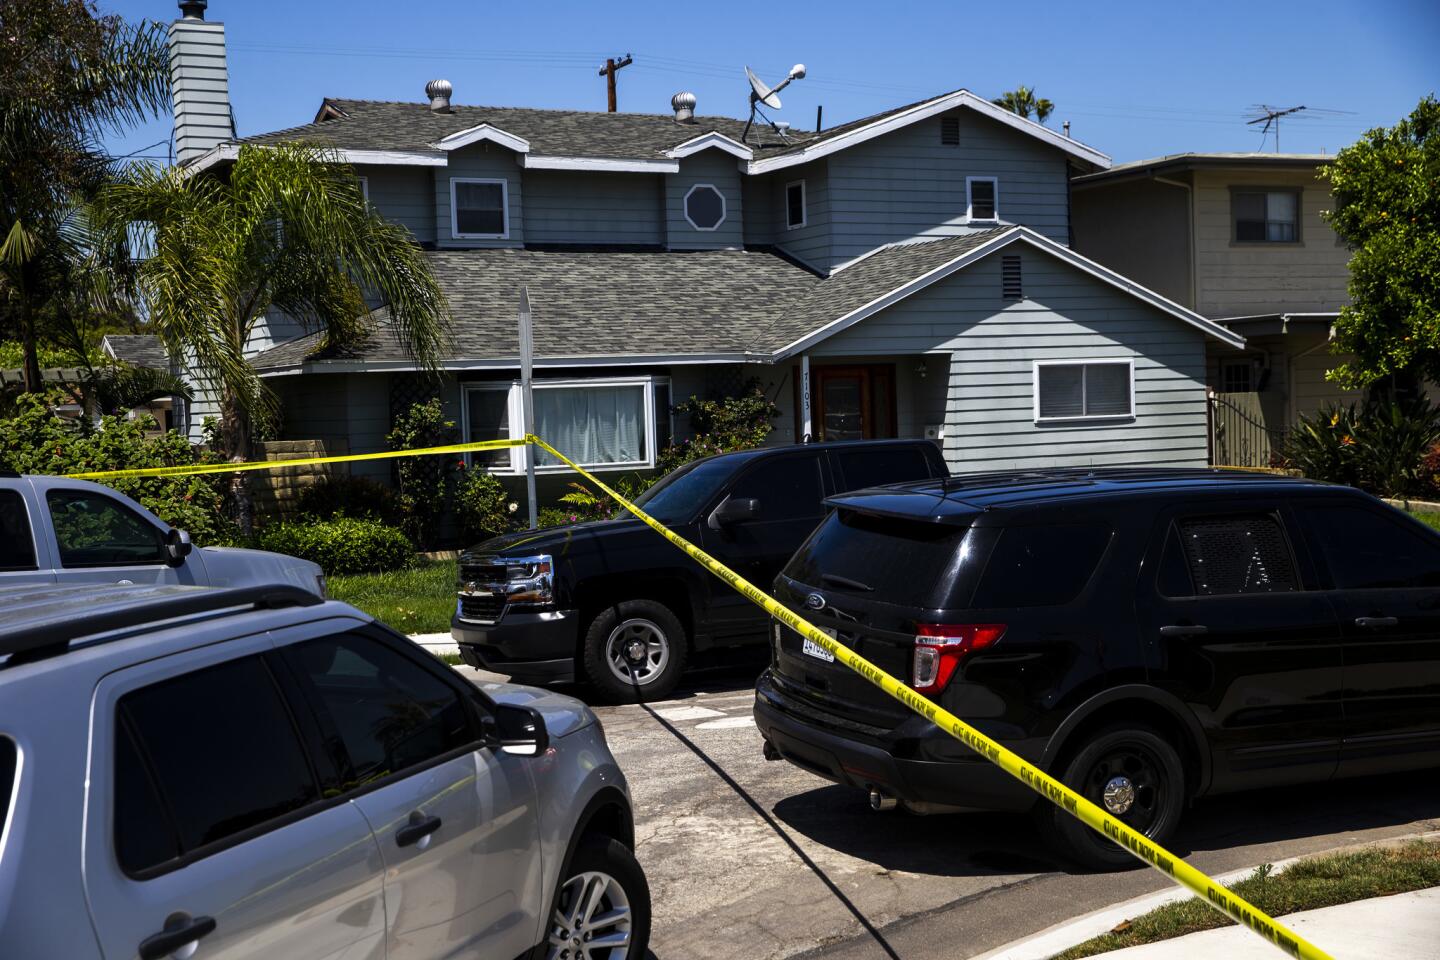 Law enforcement officials search a Long Beach property in connection with the Aliso Viejo explosion.